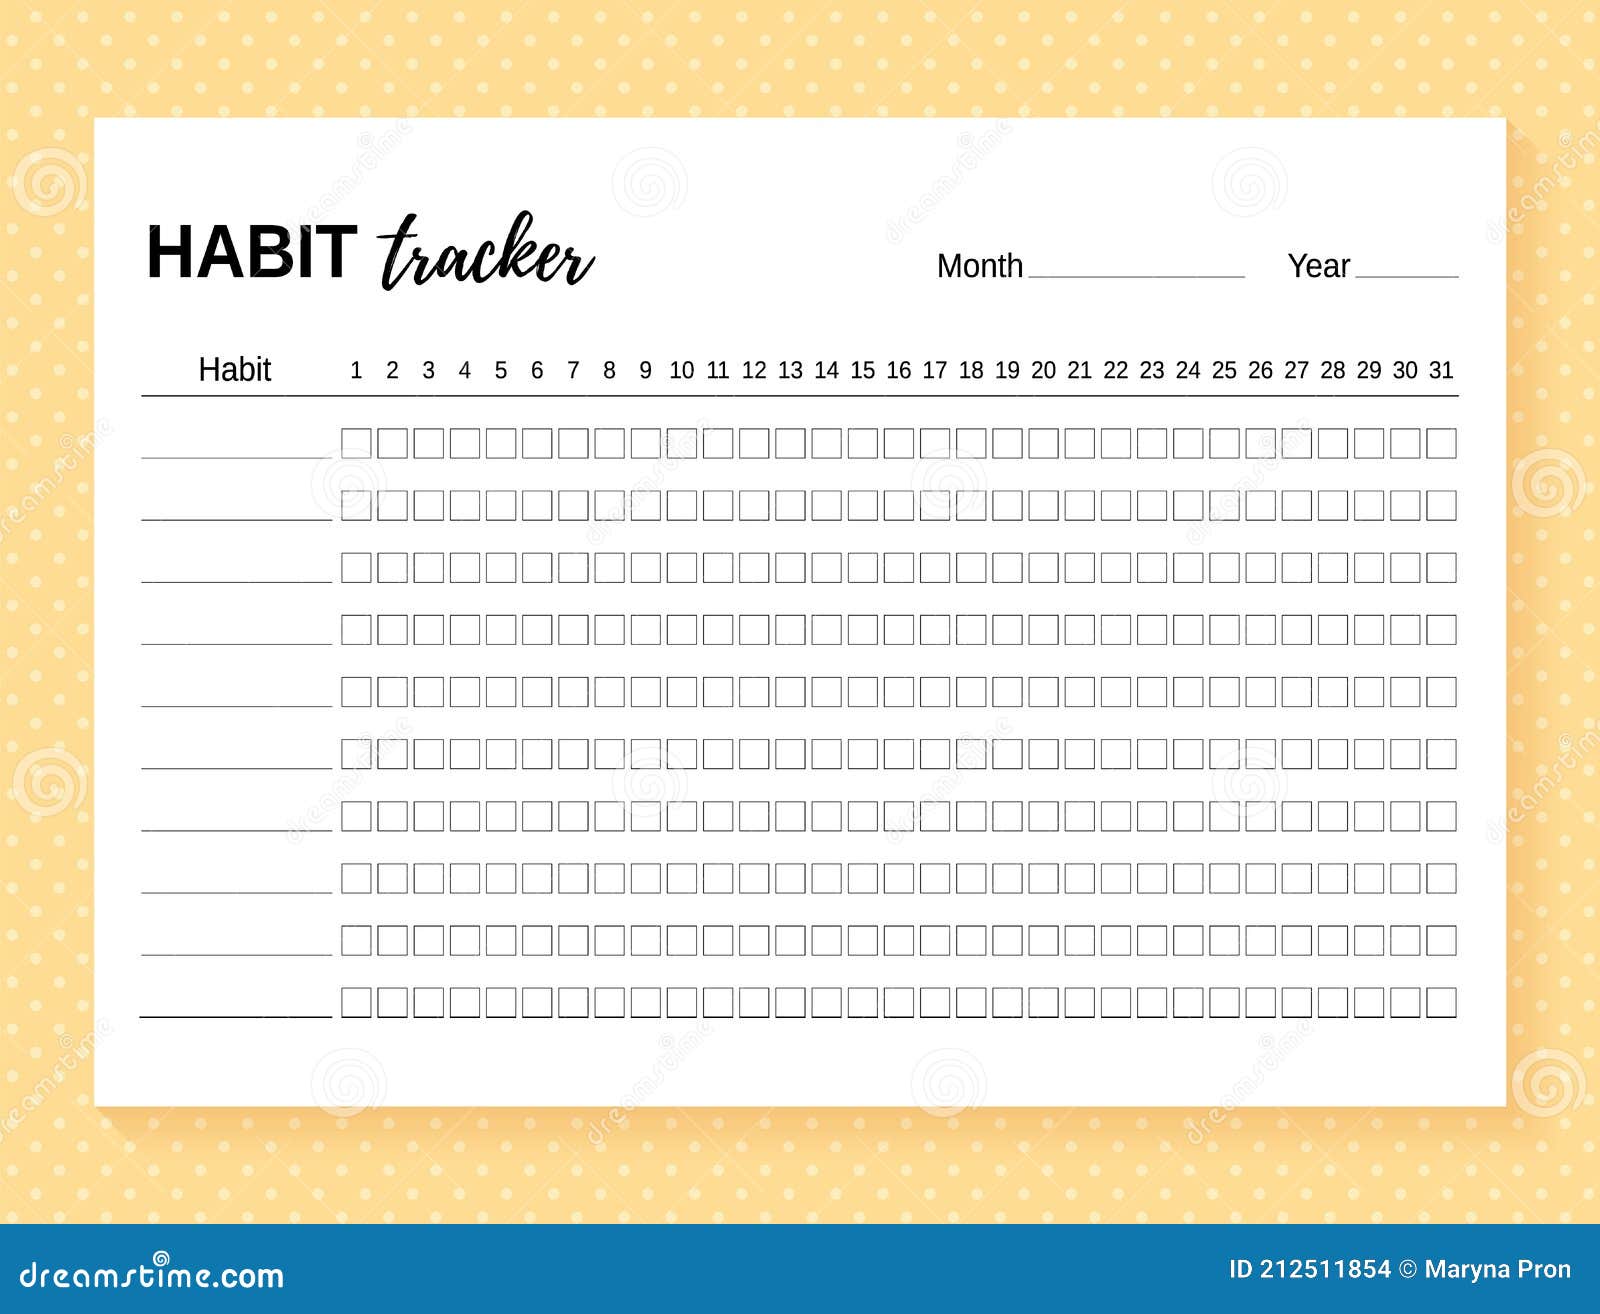 habit tracker template. habit diary layout for month.  